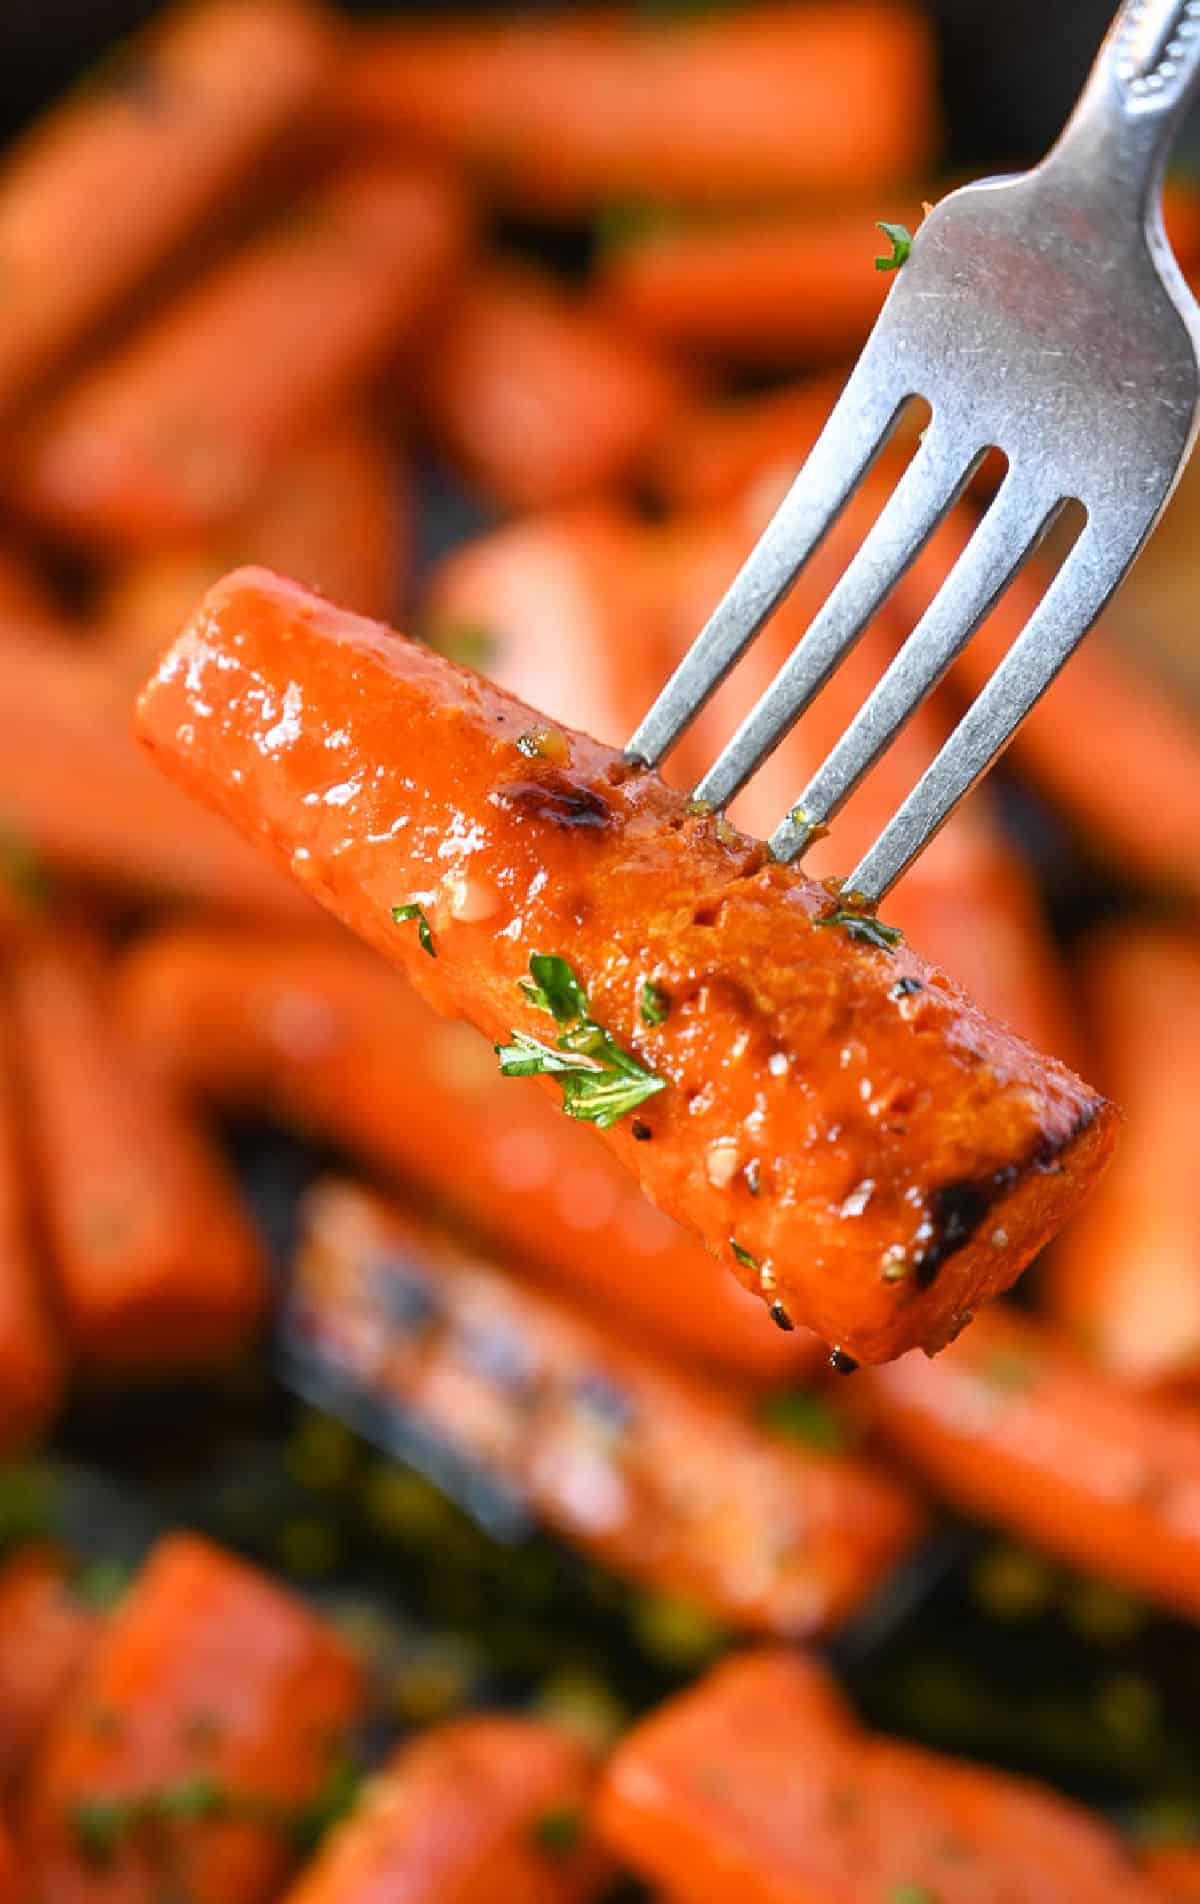 A fork picking up a roasted carrot.